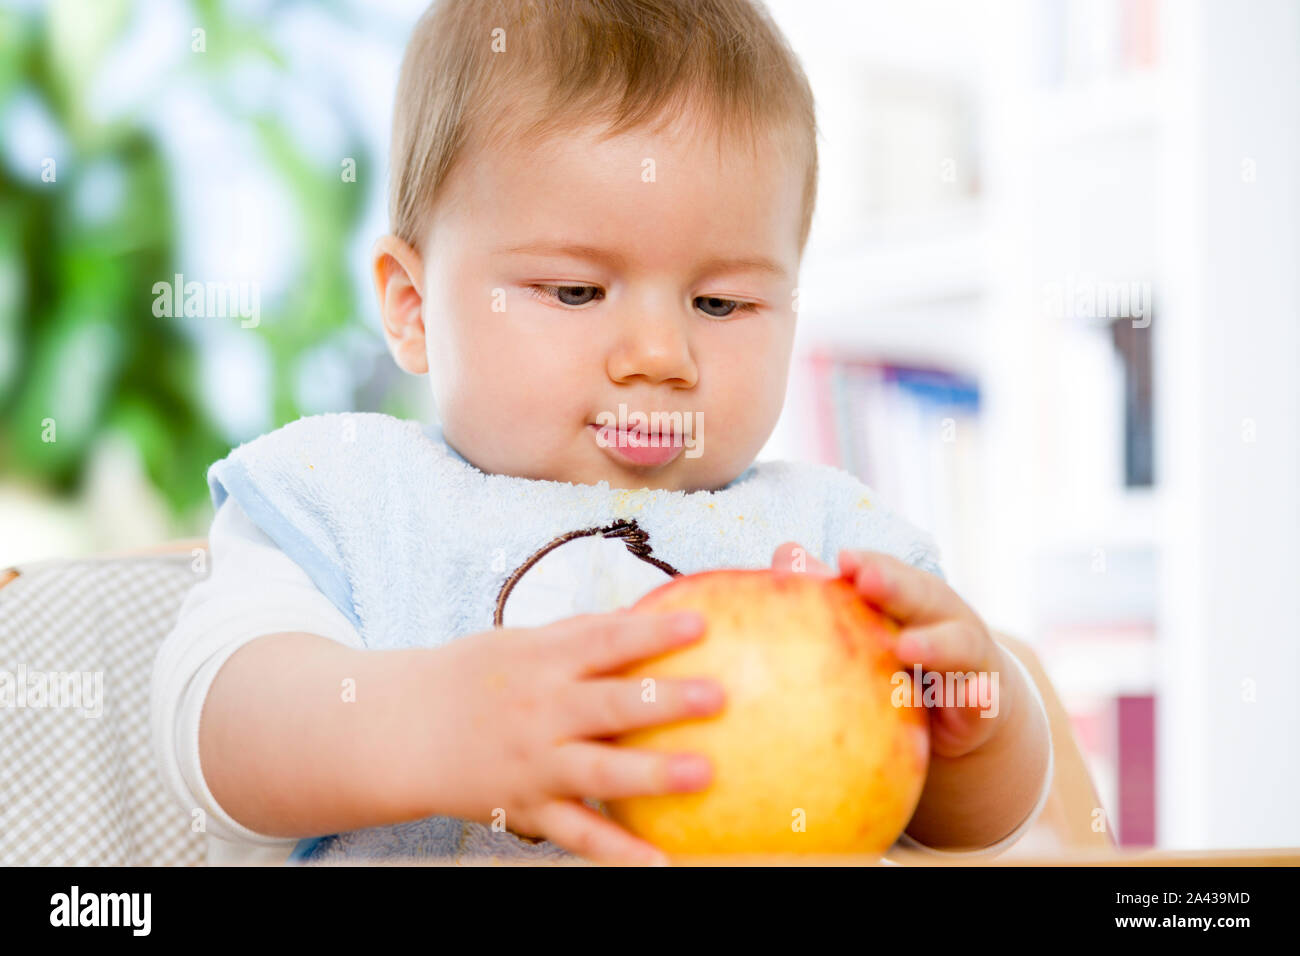 Cute baby boy holding an apple in his hands. Stock Photo